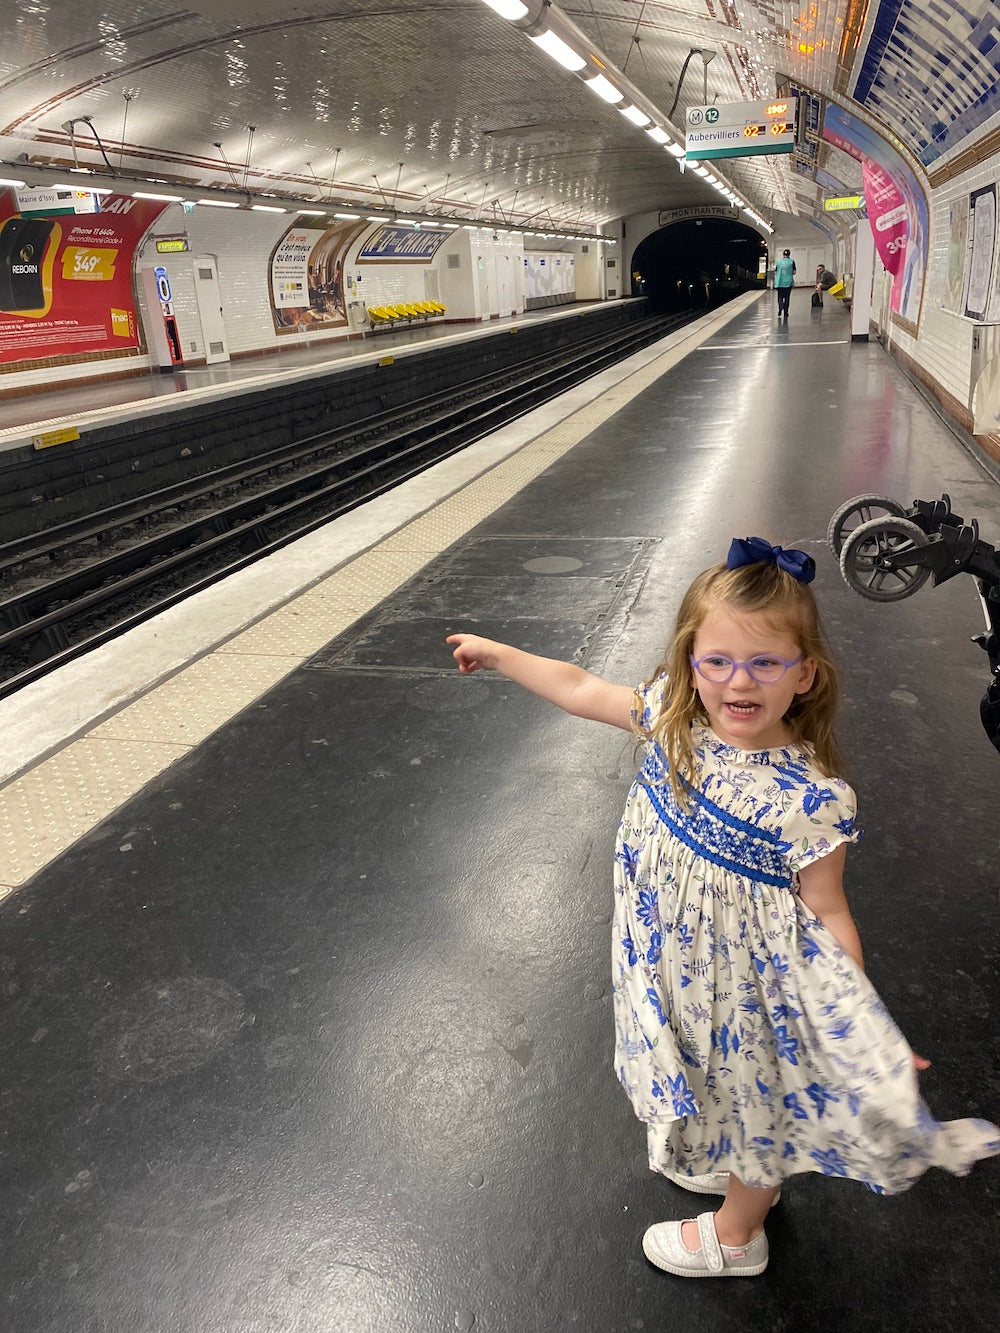  Paris family trip kidfriendly holiday in France Metro